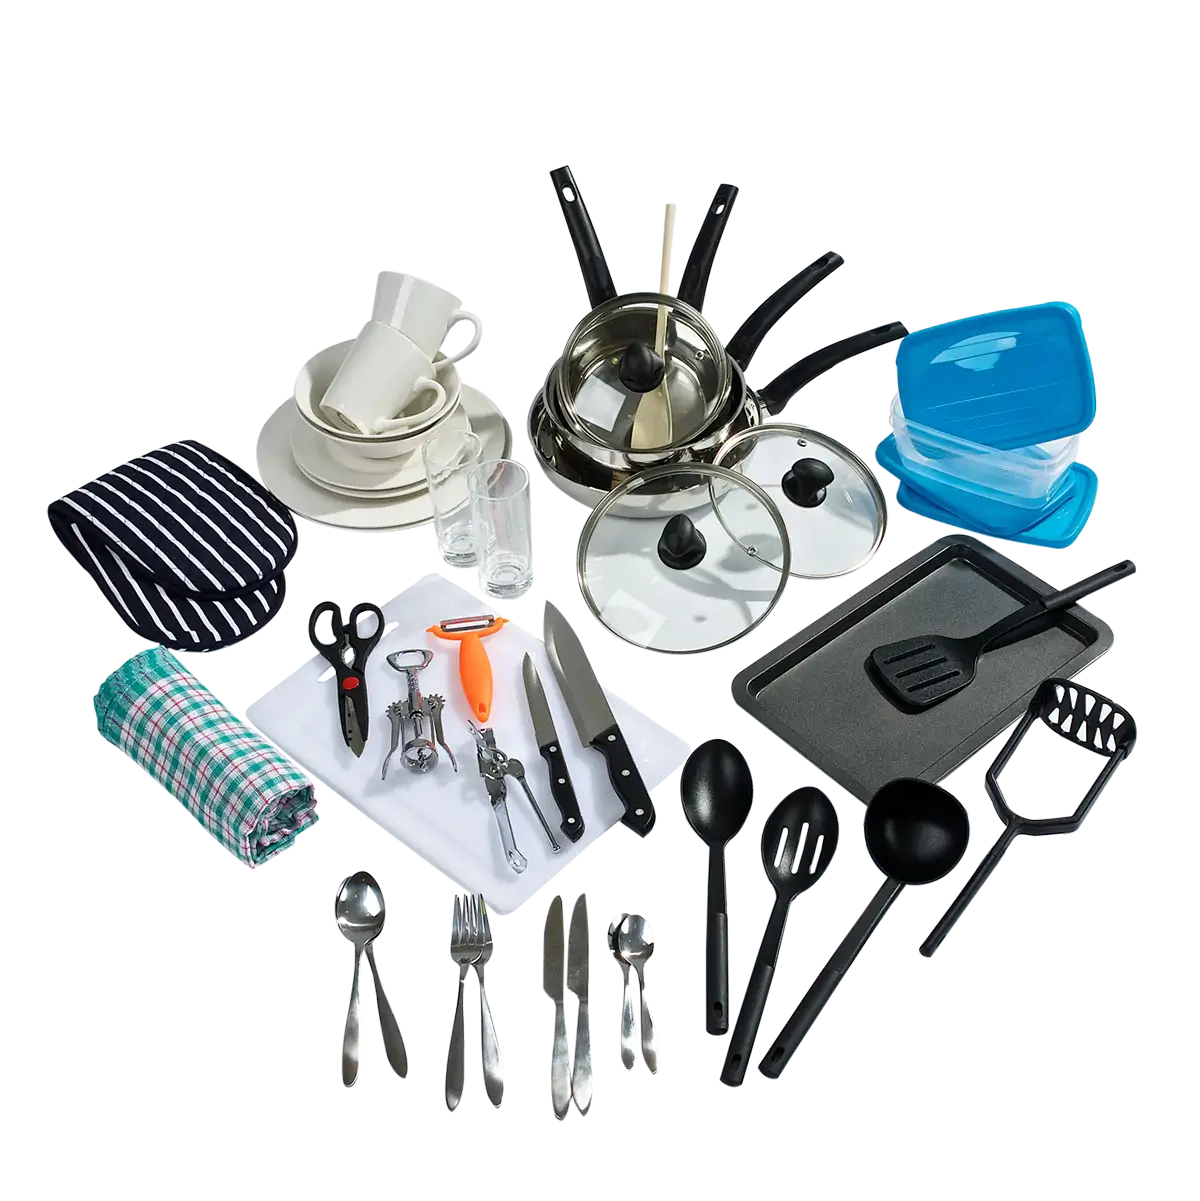 Kitchen Kit for Students